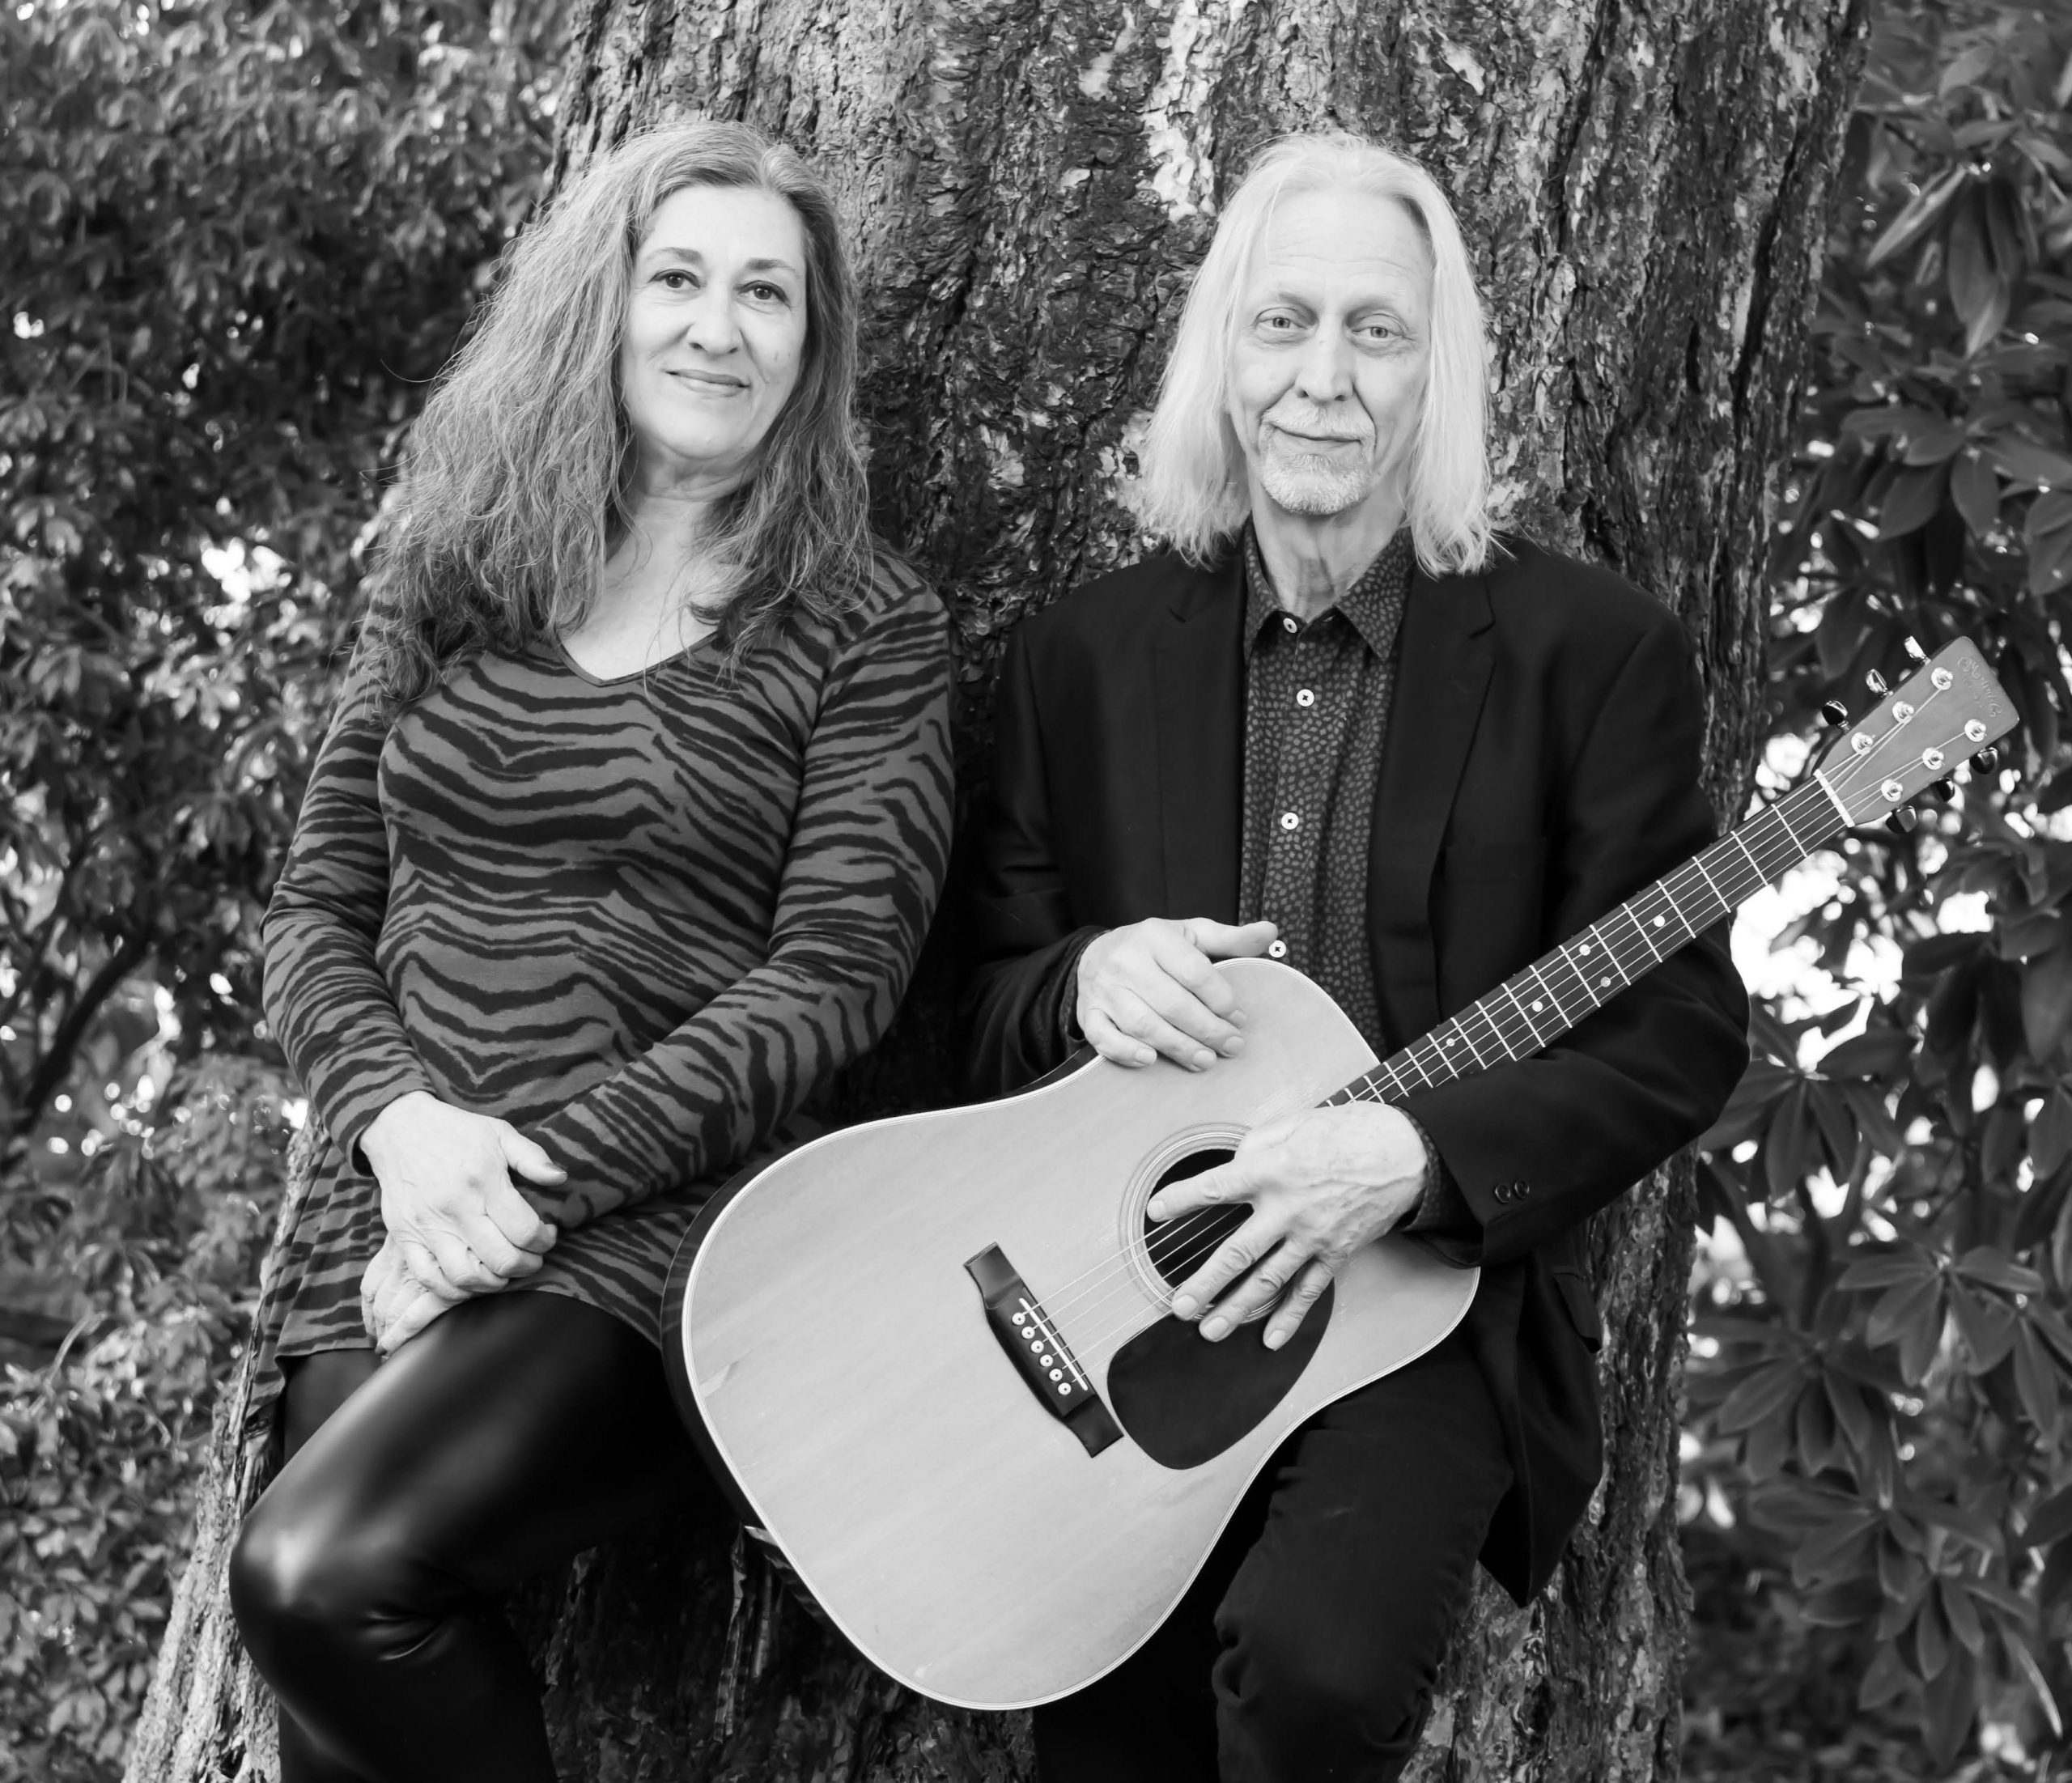 Live Music with Two of Us - November 26